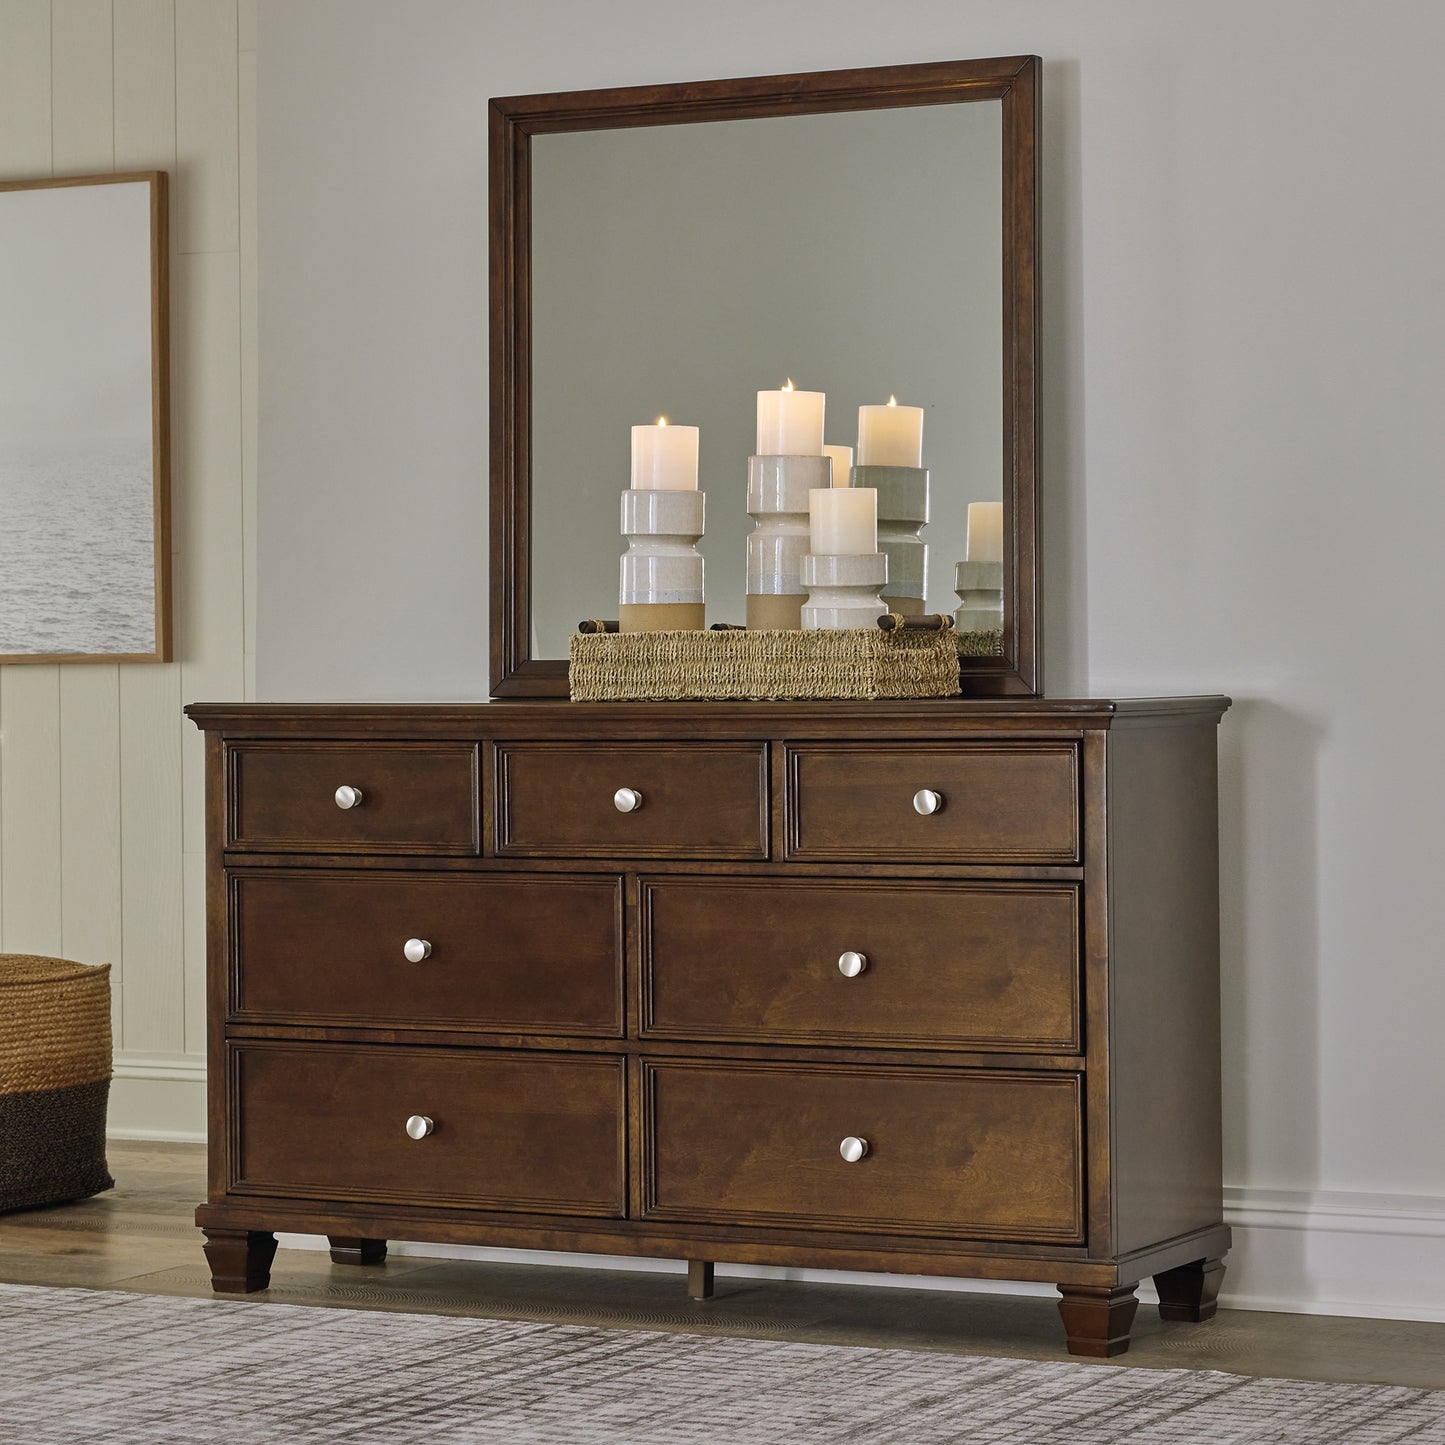 Danabrin Twin Panel Bed with Mirrored Dresser and Nightstand JB's Furniture  Home Furniture, Home Decor, Furniture Store